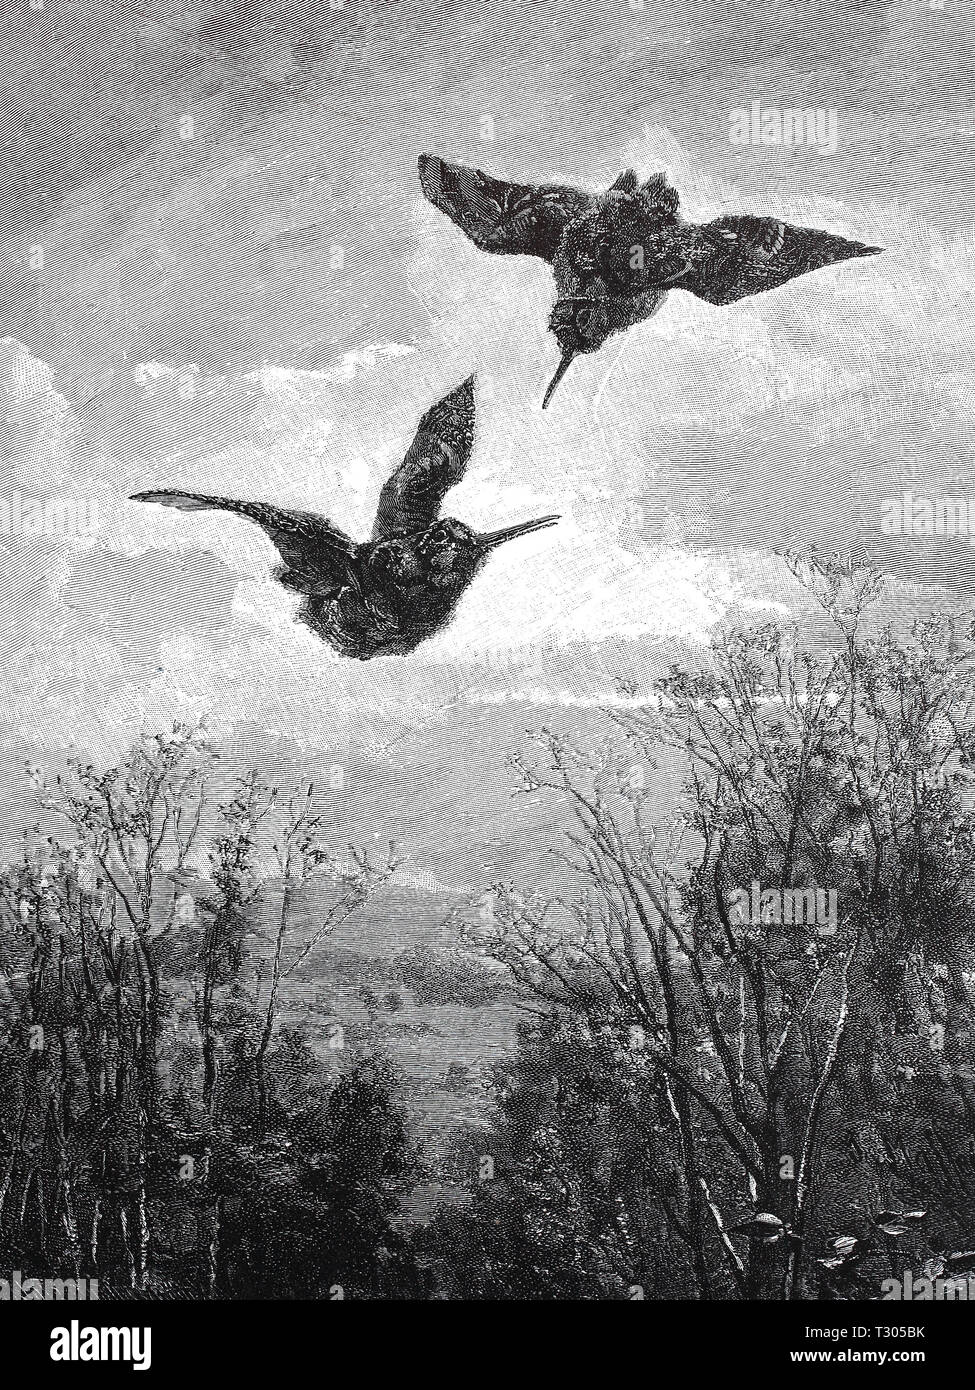 Digital improved reproduction, two flying snipes about the scenery, zwei fliegende Schnepfen über der Landschaft, from an original print from the 19th century Stock Photo